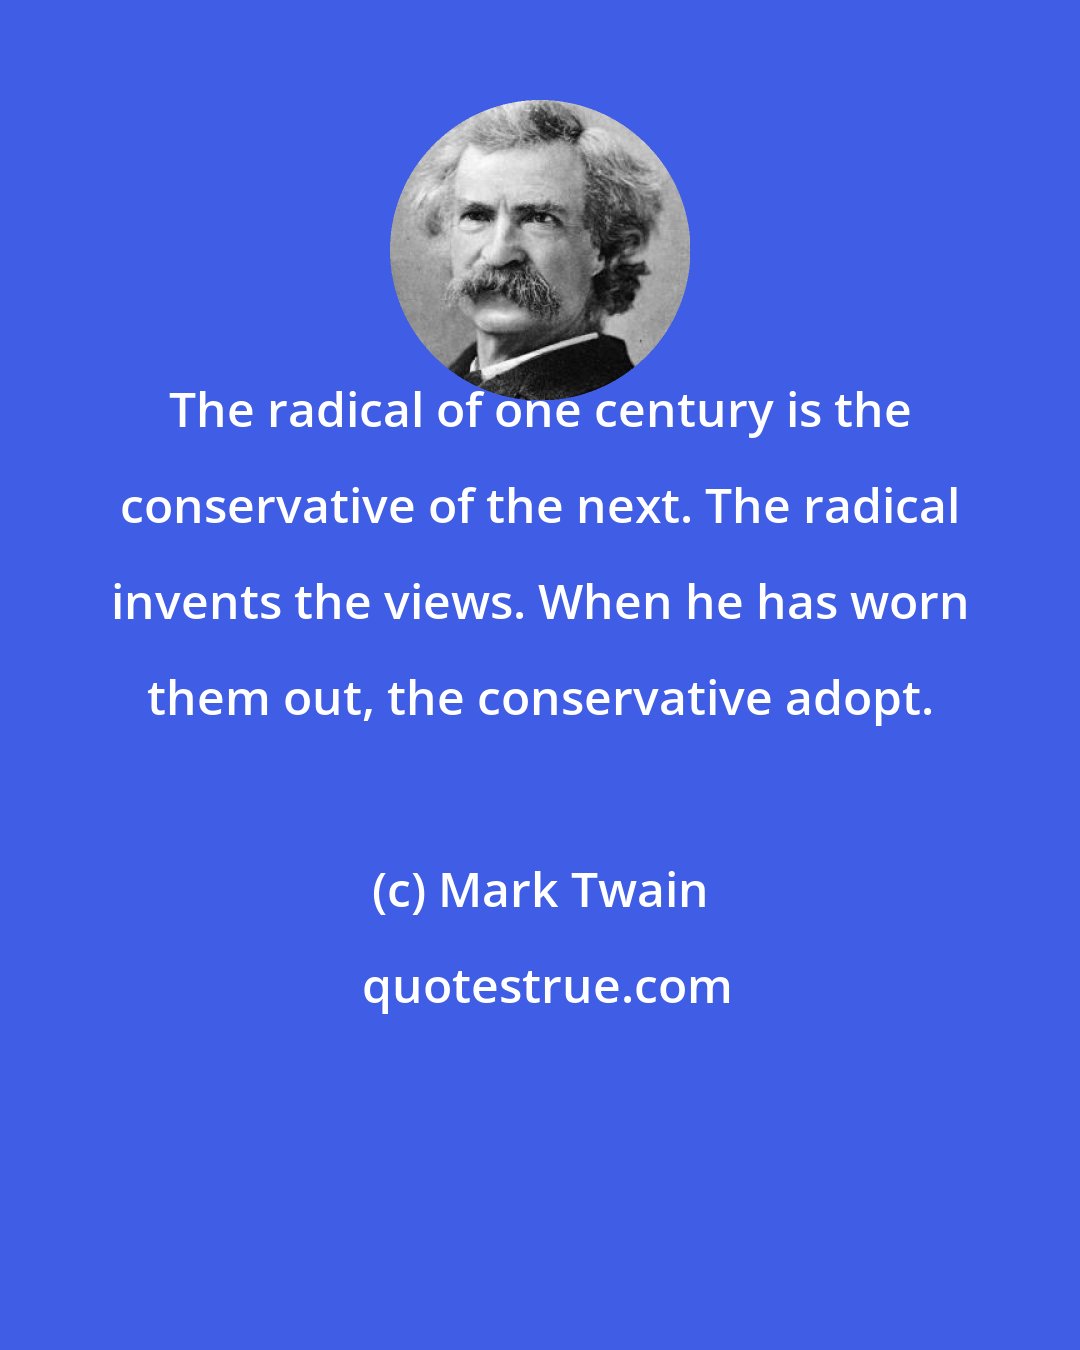 Mark Twain: The radical of one century is the conservative of the next. The radical invents the views. When he has worn them out, the conservative adopt.